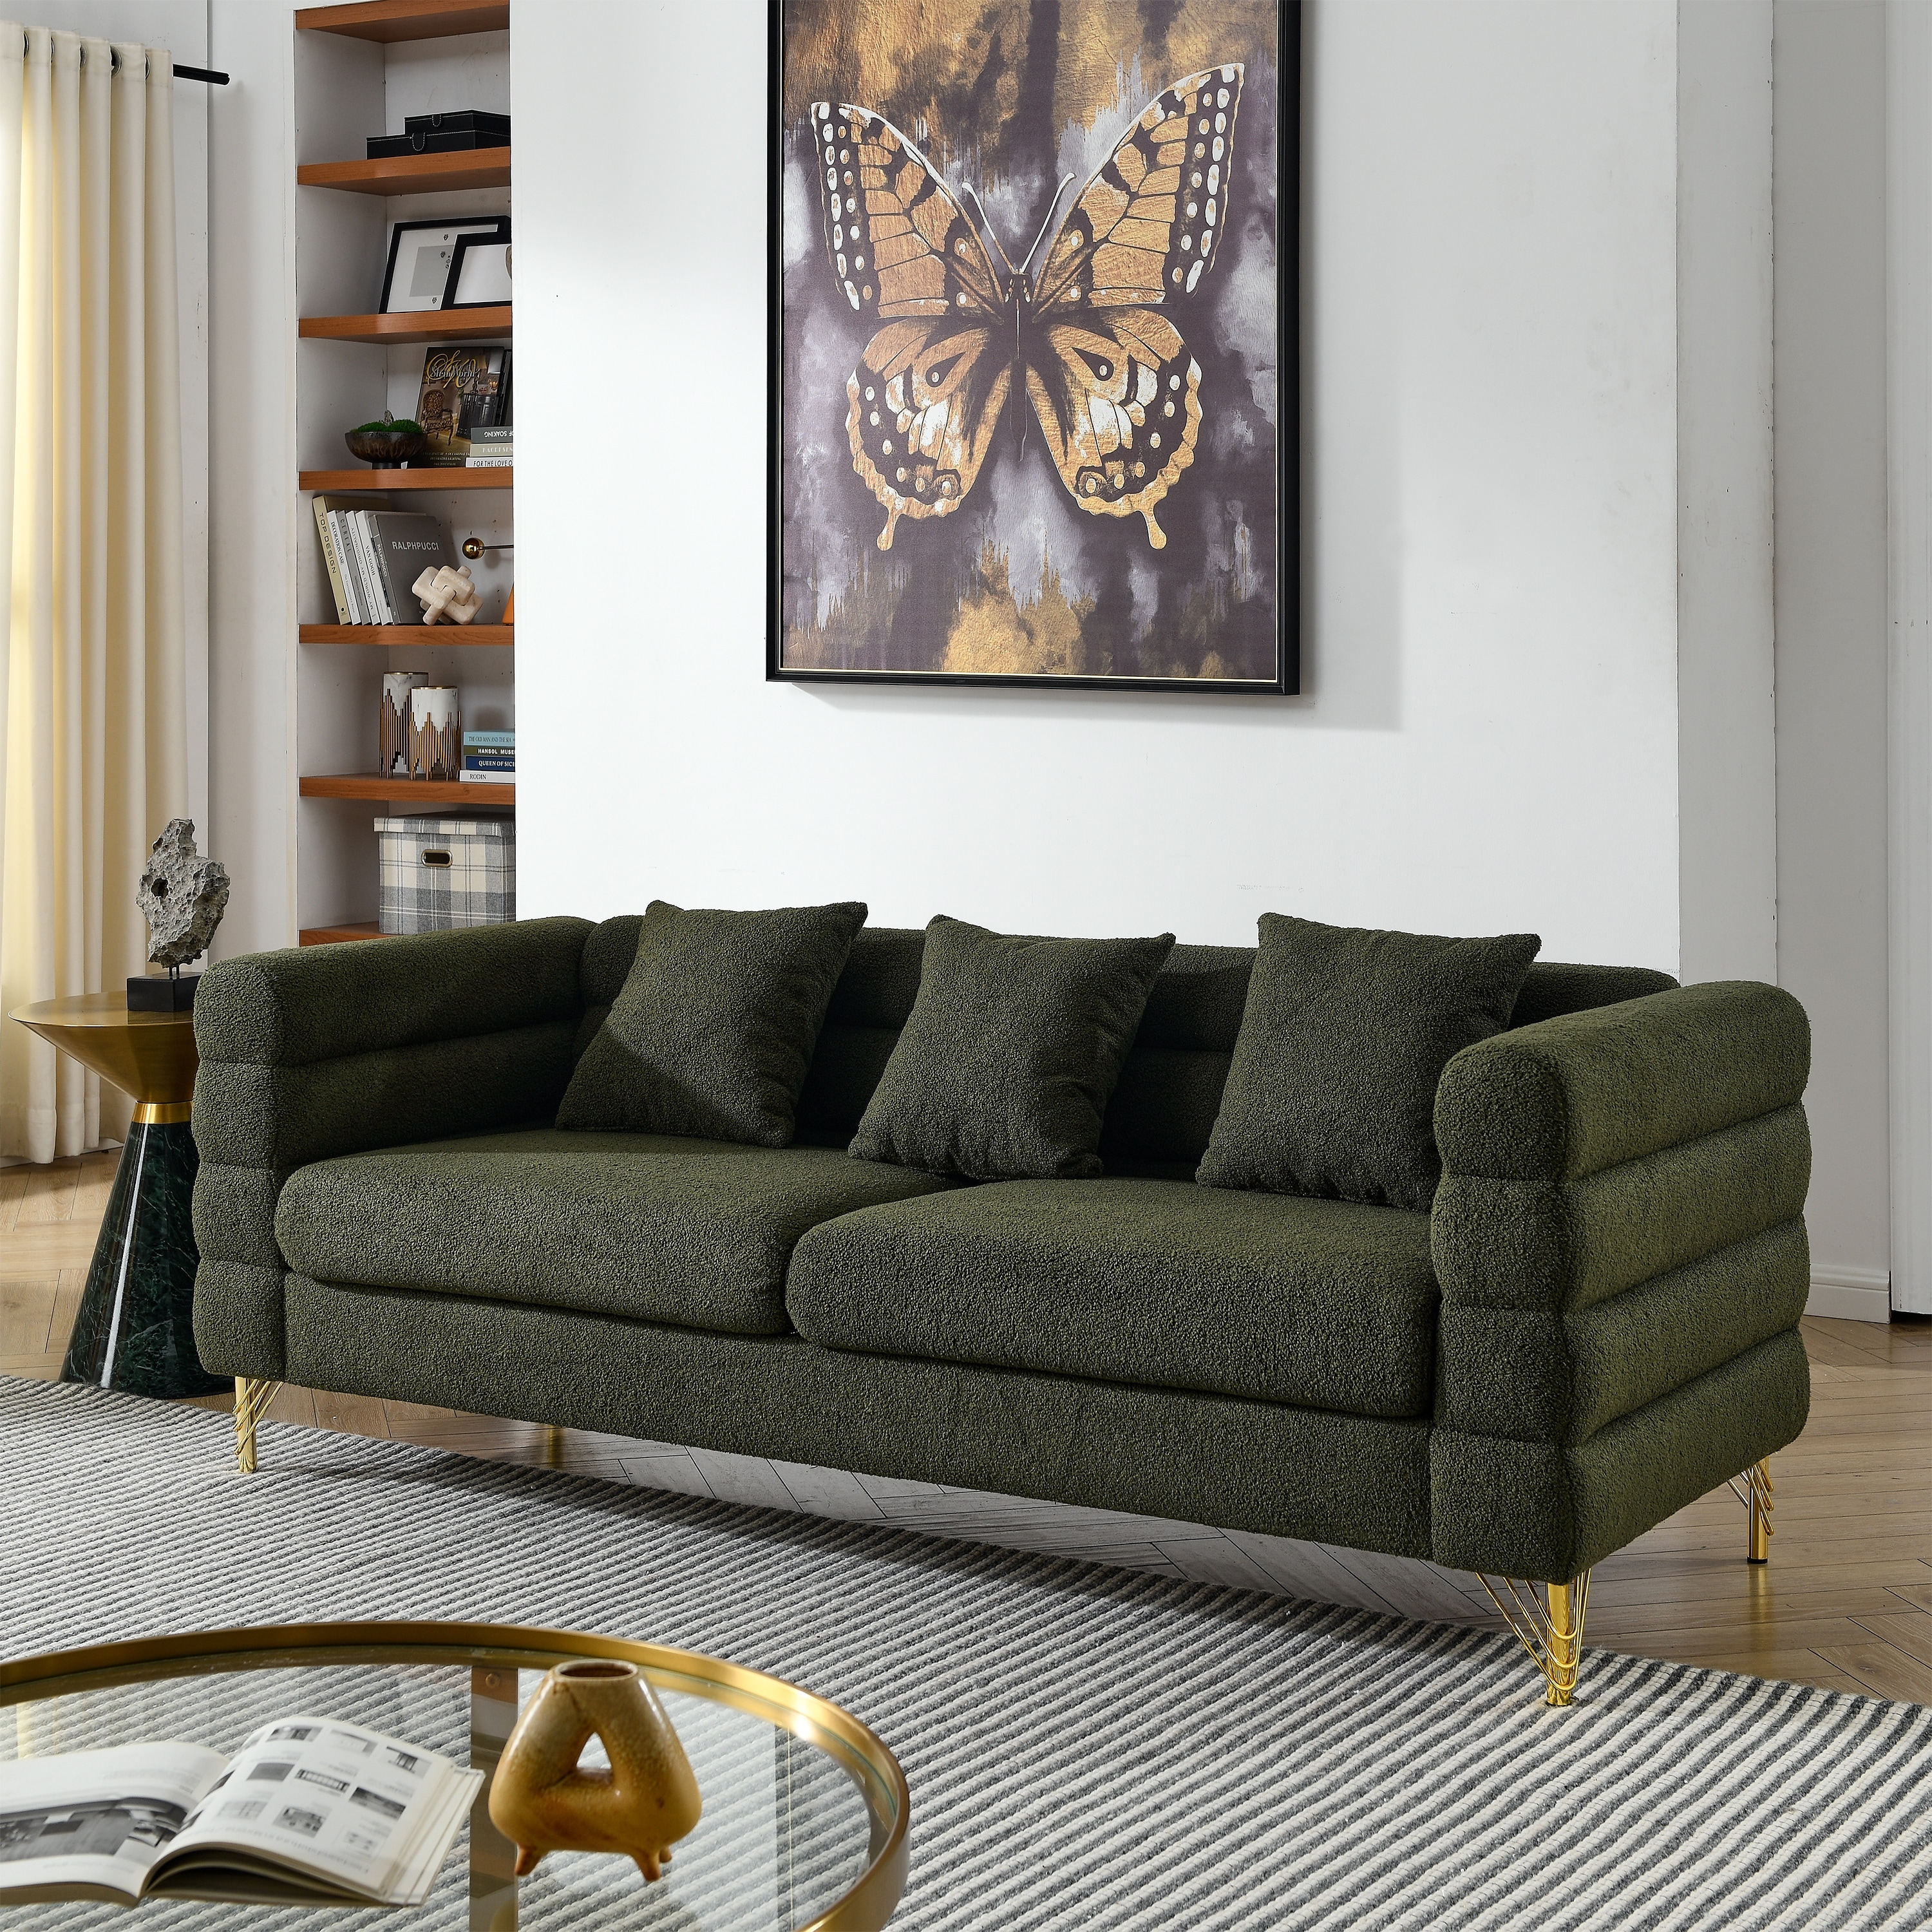 https://ak1.ostkcdn.com/images/products/is/images/direct/34c296b7392ae185be6c89e2a6066e475a467cf6/Modern-Streamline-3-Seat-Sofa-with-Lumbar-Pillows-and-Golden-Metal-Legs.jpg